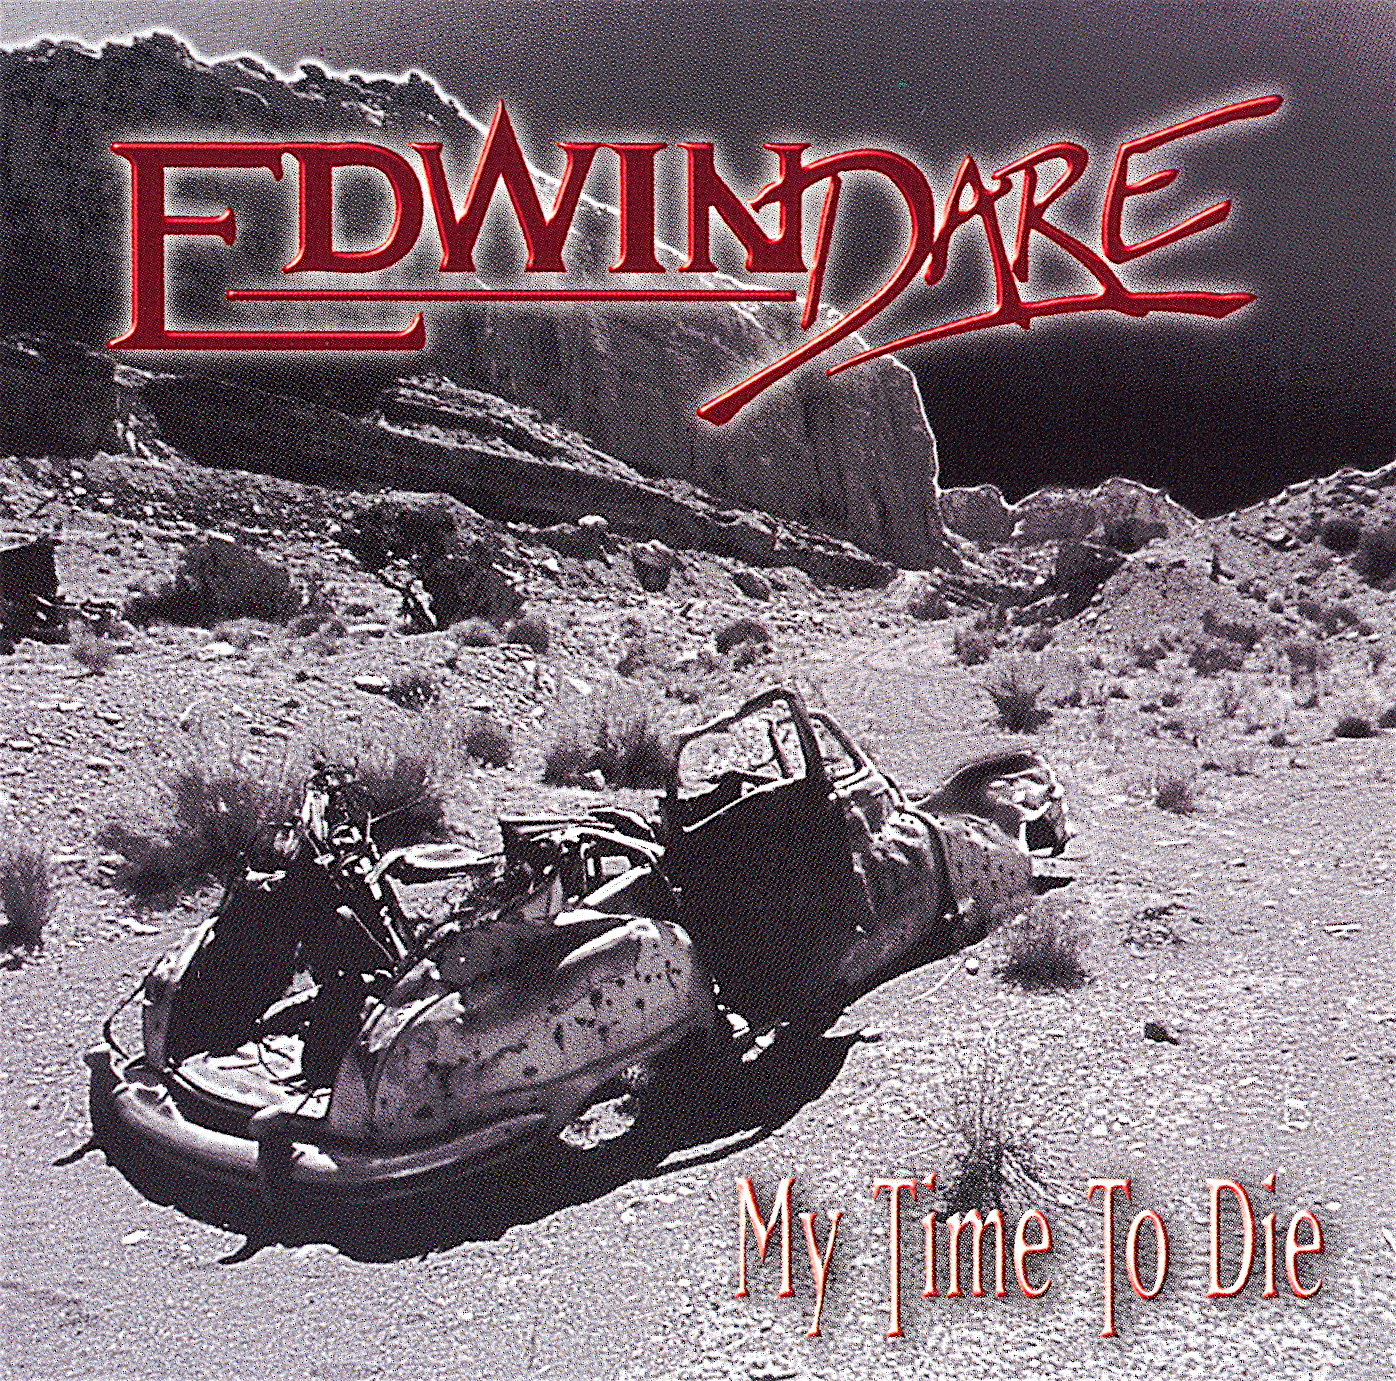 EDWIN DARE - My Time to Die cover 